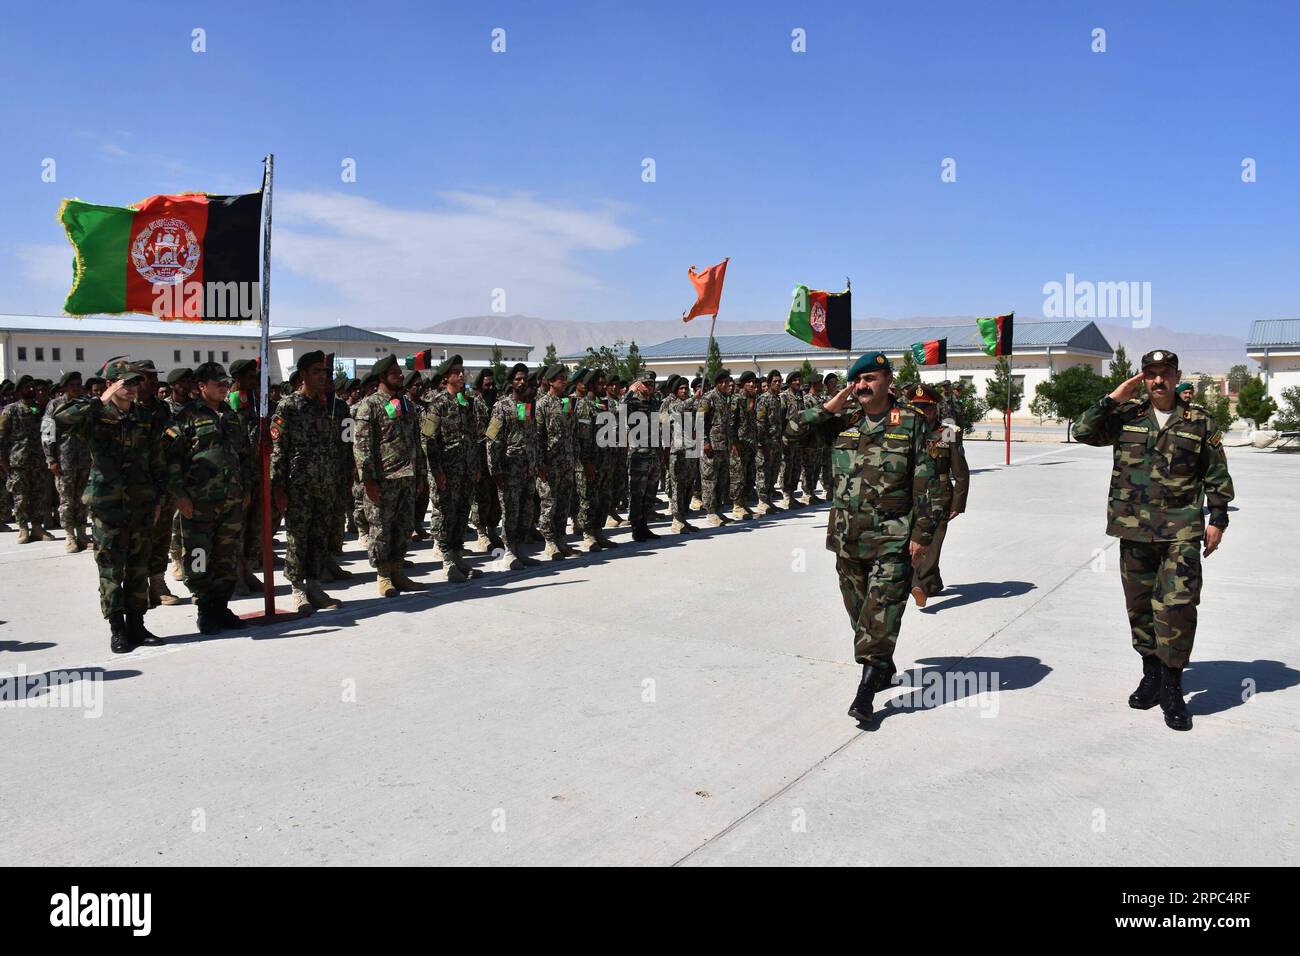 News Bilder des Tages (190623) -- MAZAR-E-SHARIF, June 23, 2019 -- Afghan army trainees take part in their graduation ceremony in Mazar-i-Sharif, capital of Balkh province in northern Afghanistan, June 23, 2019. A total of 1,207 youths joined the country s national army on Sunday after completing a 12-week military training course, an army statement said. ) AFGHANISTAN-BALKH-ARMY-GRADUATION CEREMONY KawaxBasharat PUBLICATIONxNOTxINxCHN Stock Photo